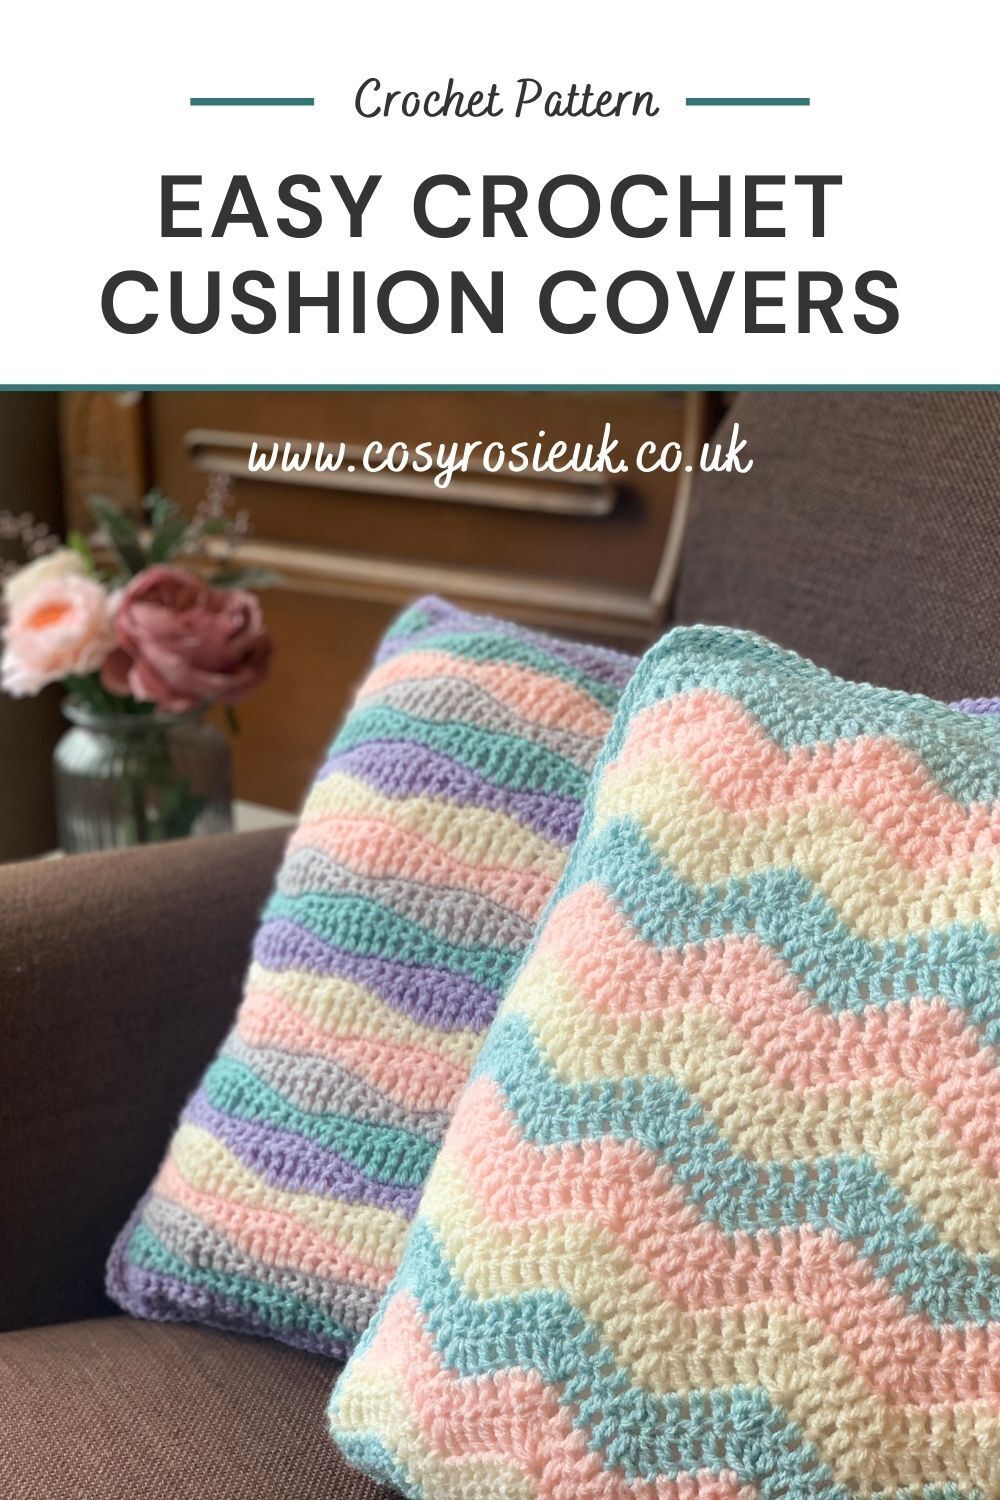 Easy Crochet Pattern for Cushion Covers